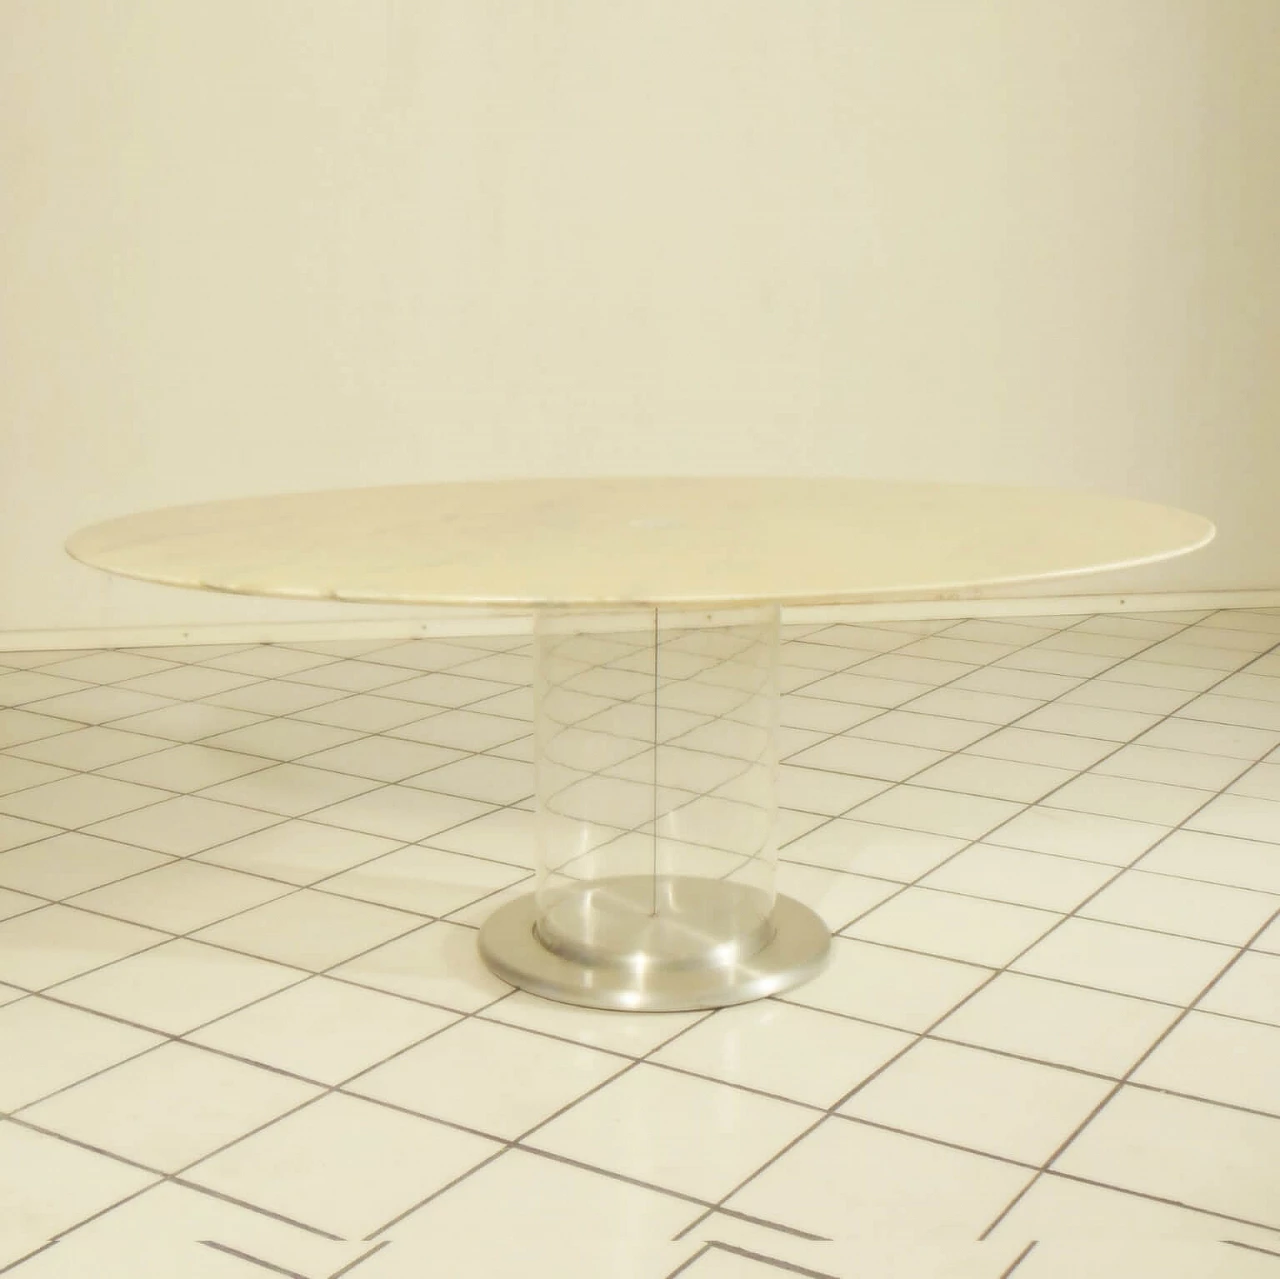 1970s Dining Table, White Marble, Lucite Base, Claudio Salocchi for Sormani Italy 1069515